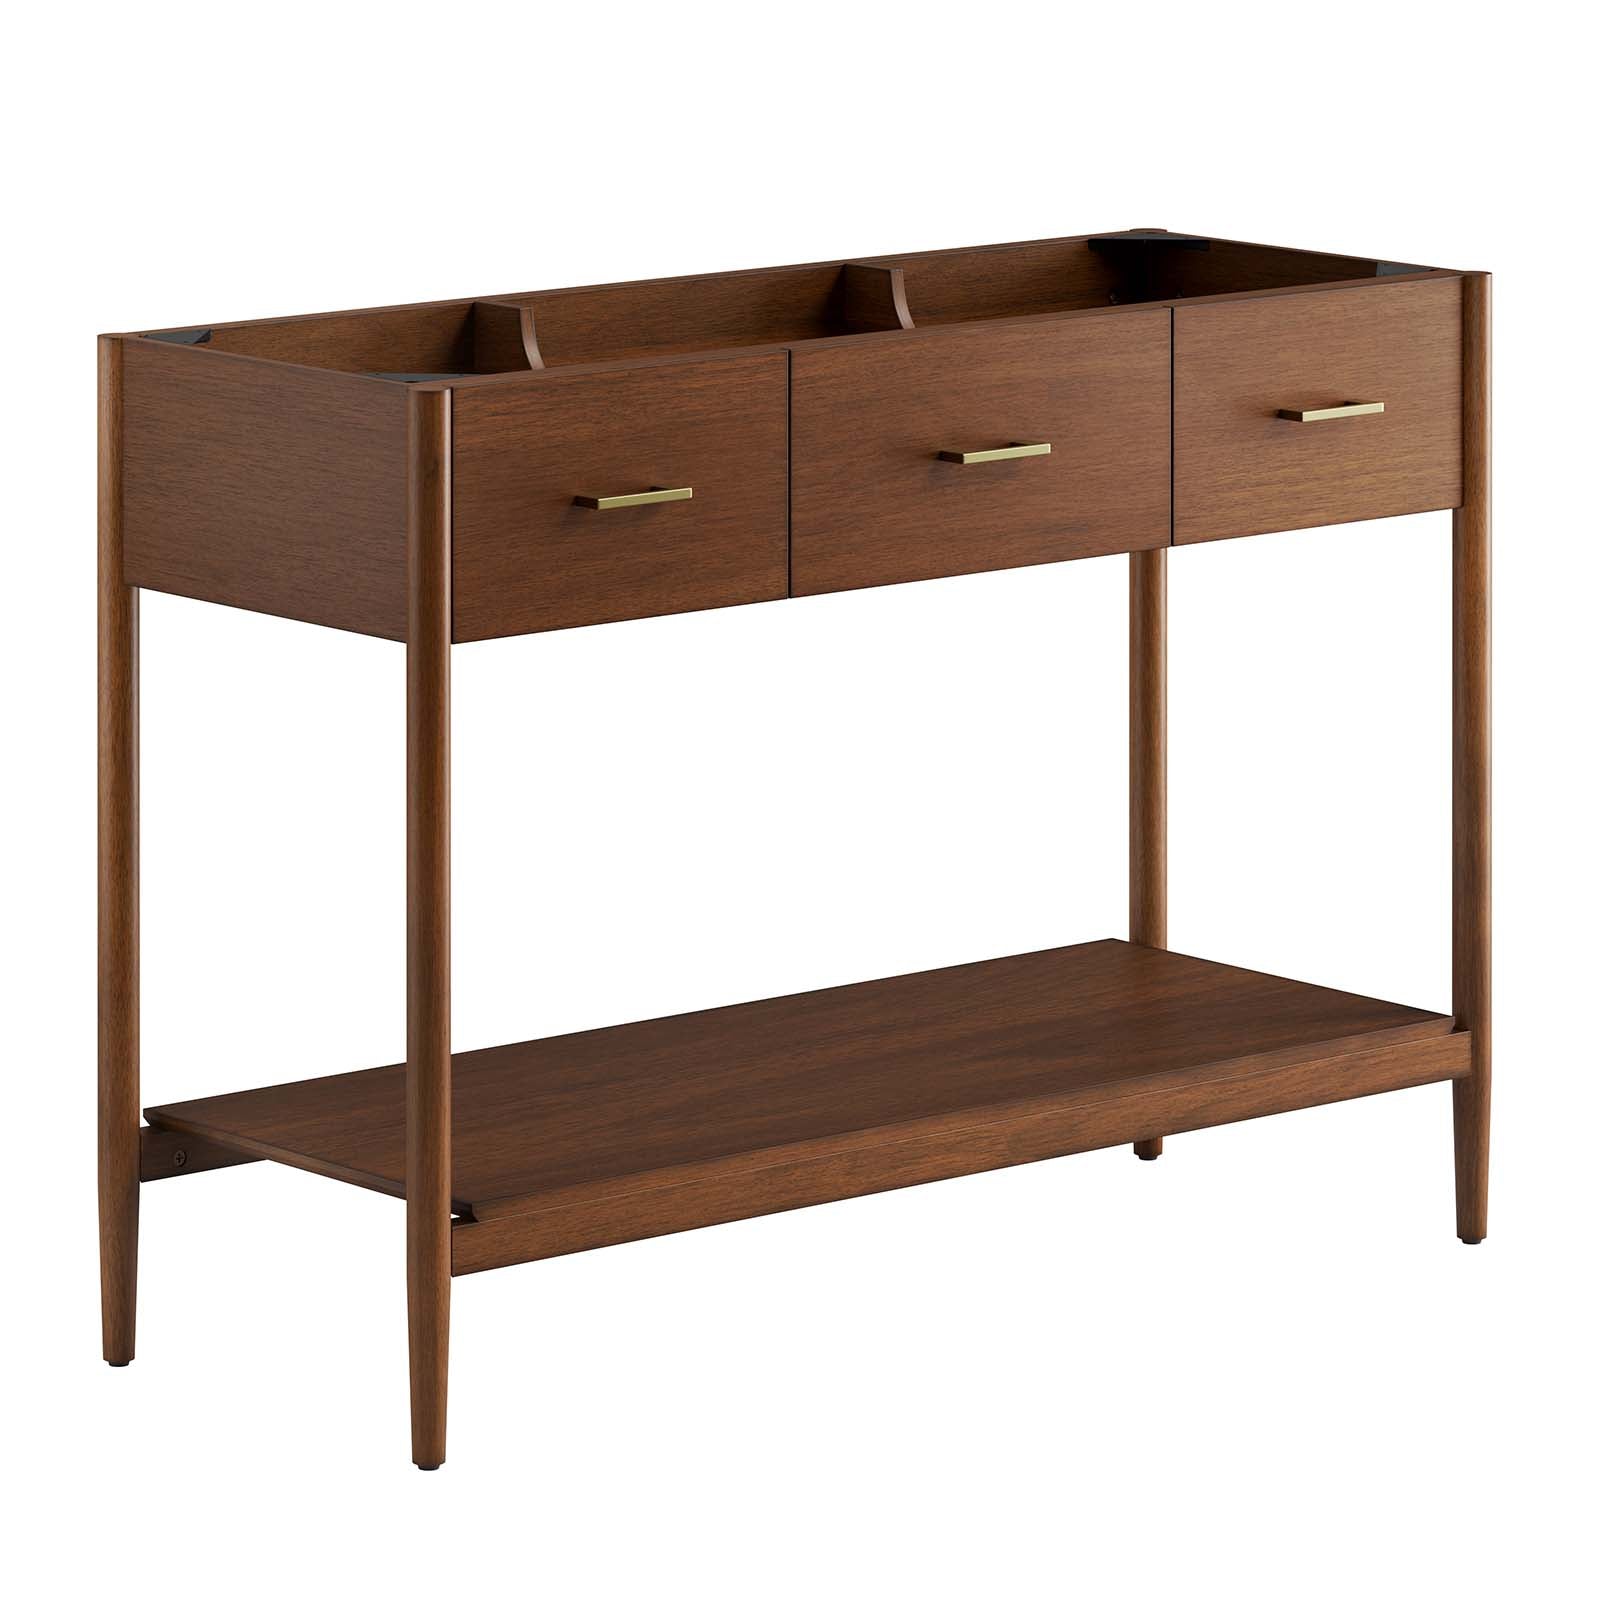 Zaire 48” Single Sink Compatible Bathroom Vanity Cabinet (Sink Basin Not Included) - East Shore Modern Home Furnishings